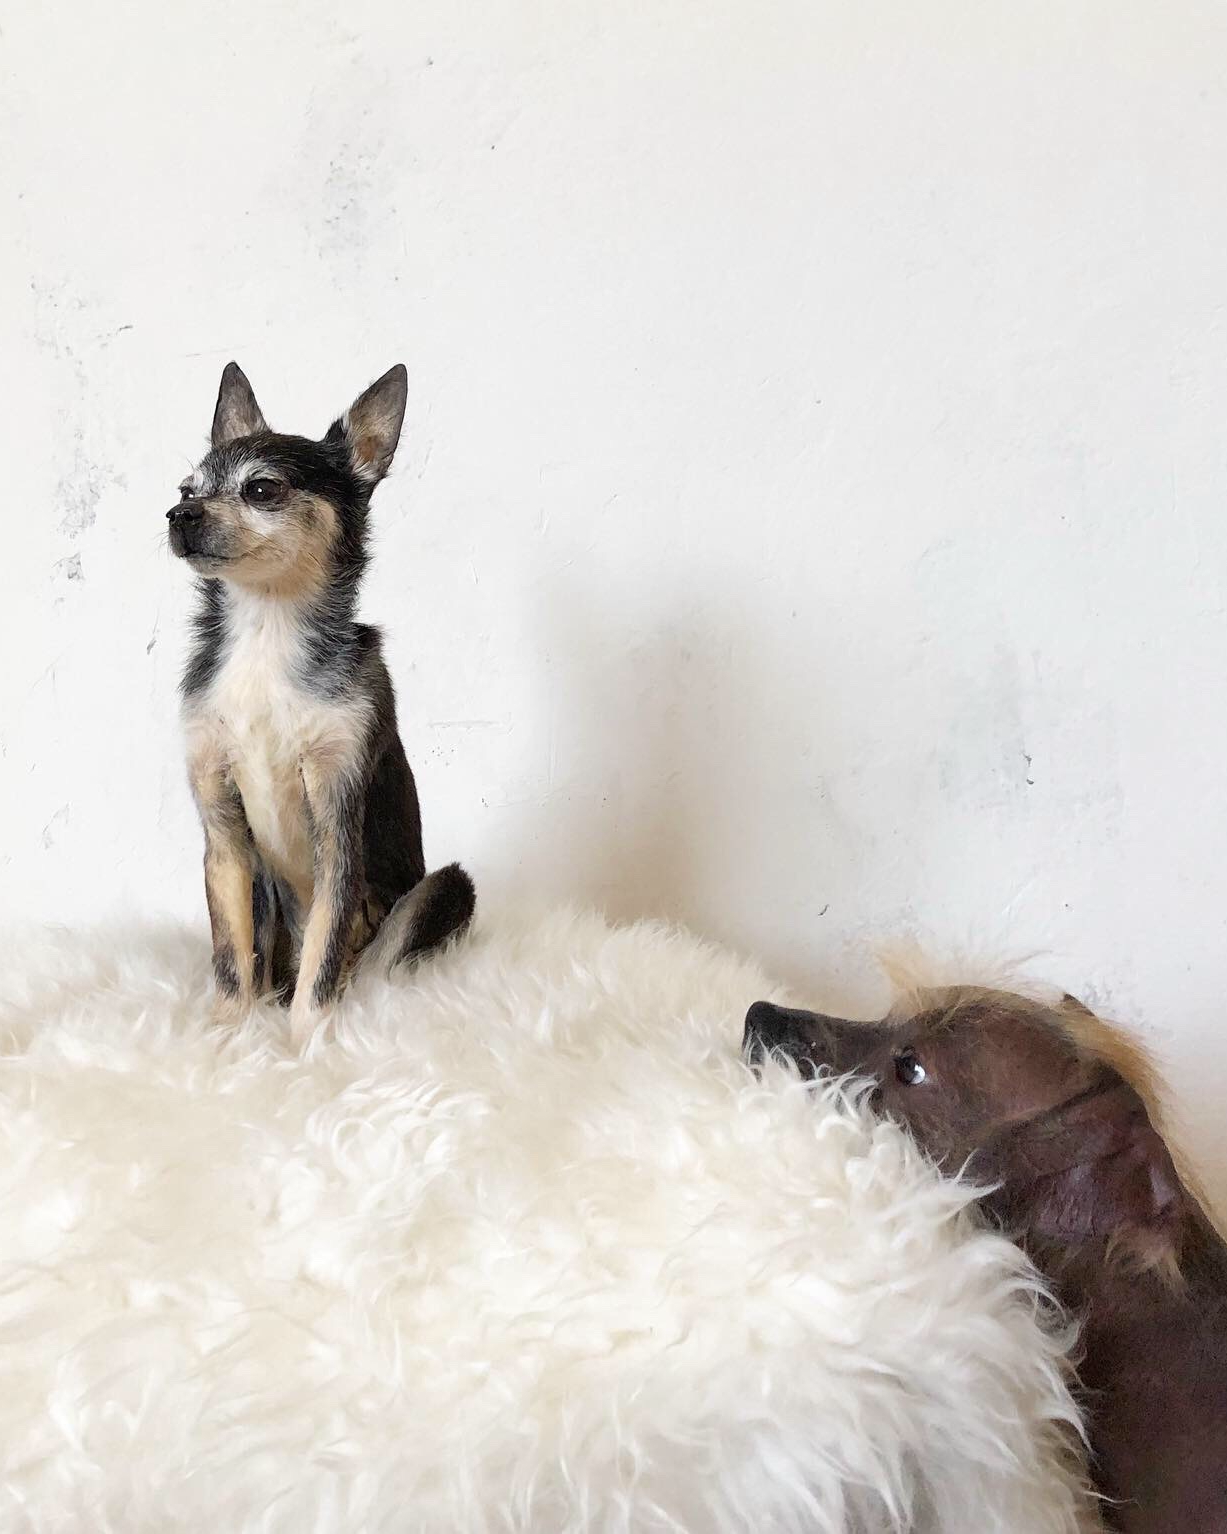 Full taxidermy of a small dog looking proud, with a live dog looking at it